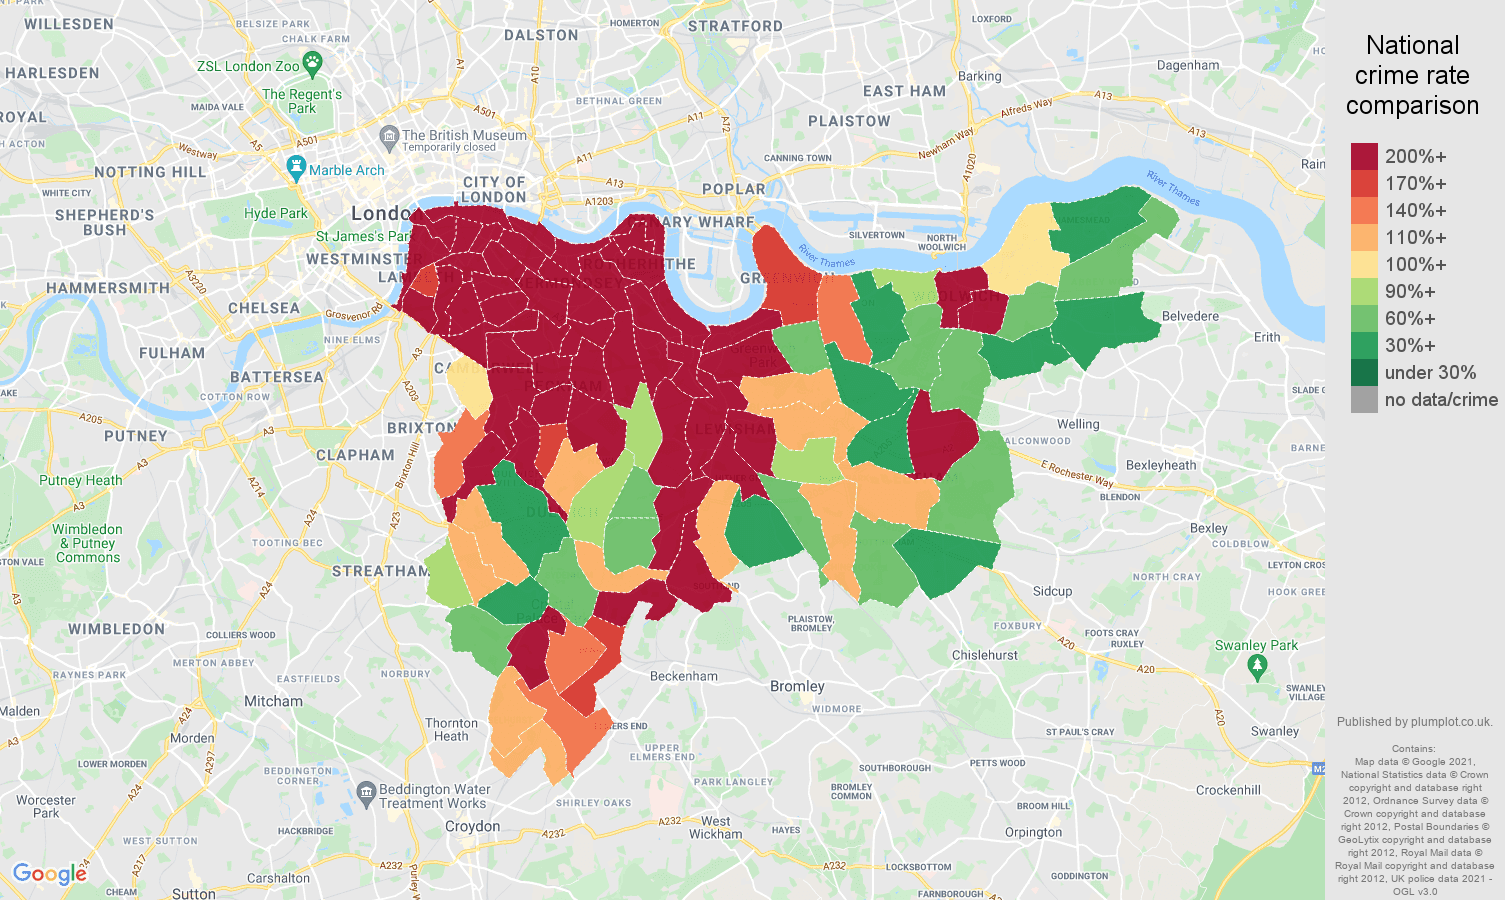 South East London theft from the person crime rate comparison map